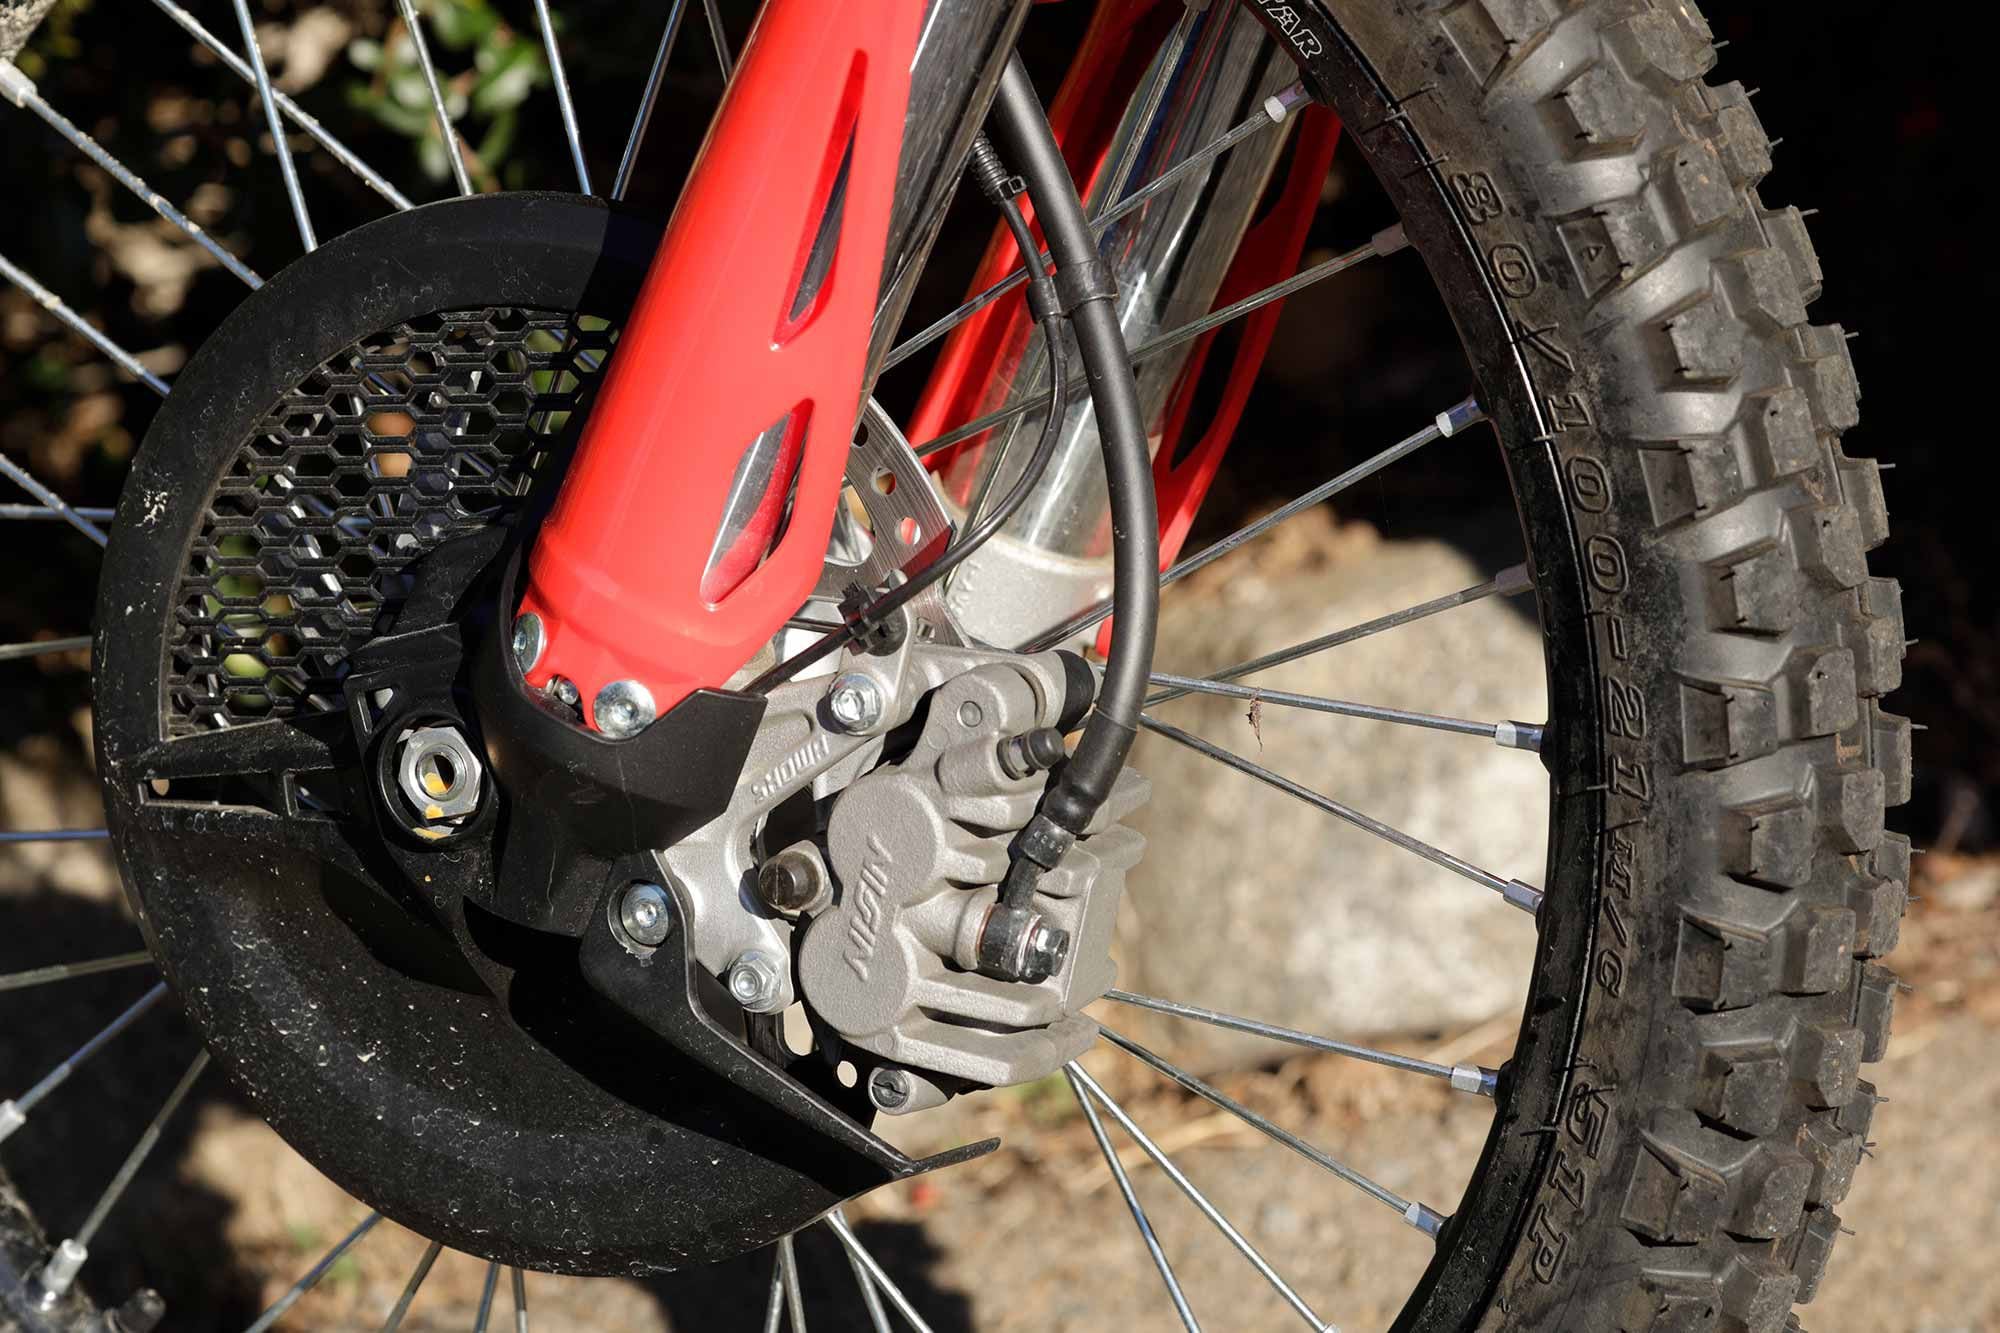 Dual hydraulic disc brakes keep speed in check on the 2021 CRF450RL.